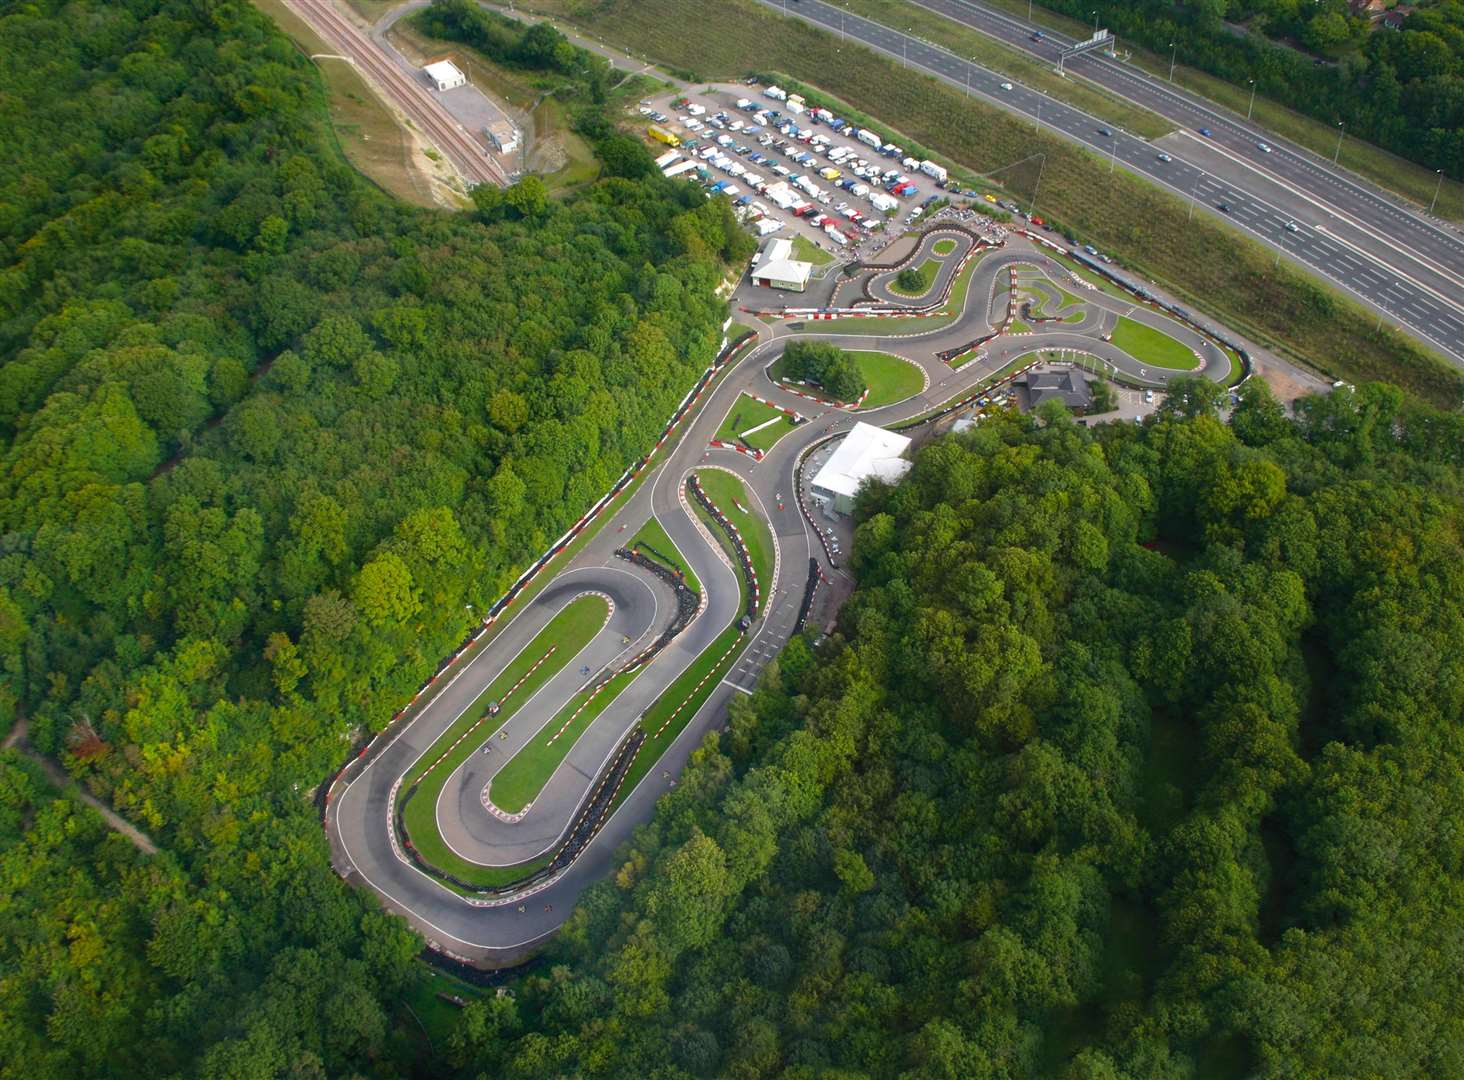 The 1,200-metre circuit south of Chatham lies within the Kent Downs Area of Outstanding Natural Beauty. It is surrounded by trees on three sides but to the east is exposed to open views from the elevated M2 motorway and Rochester Road